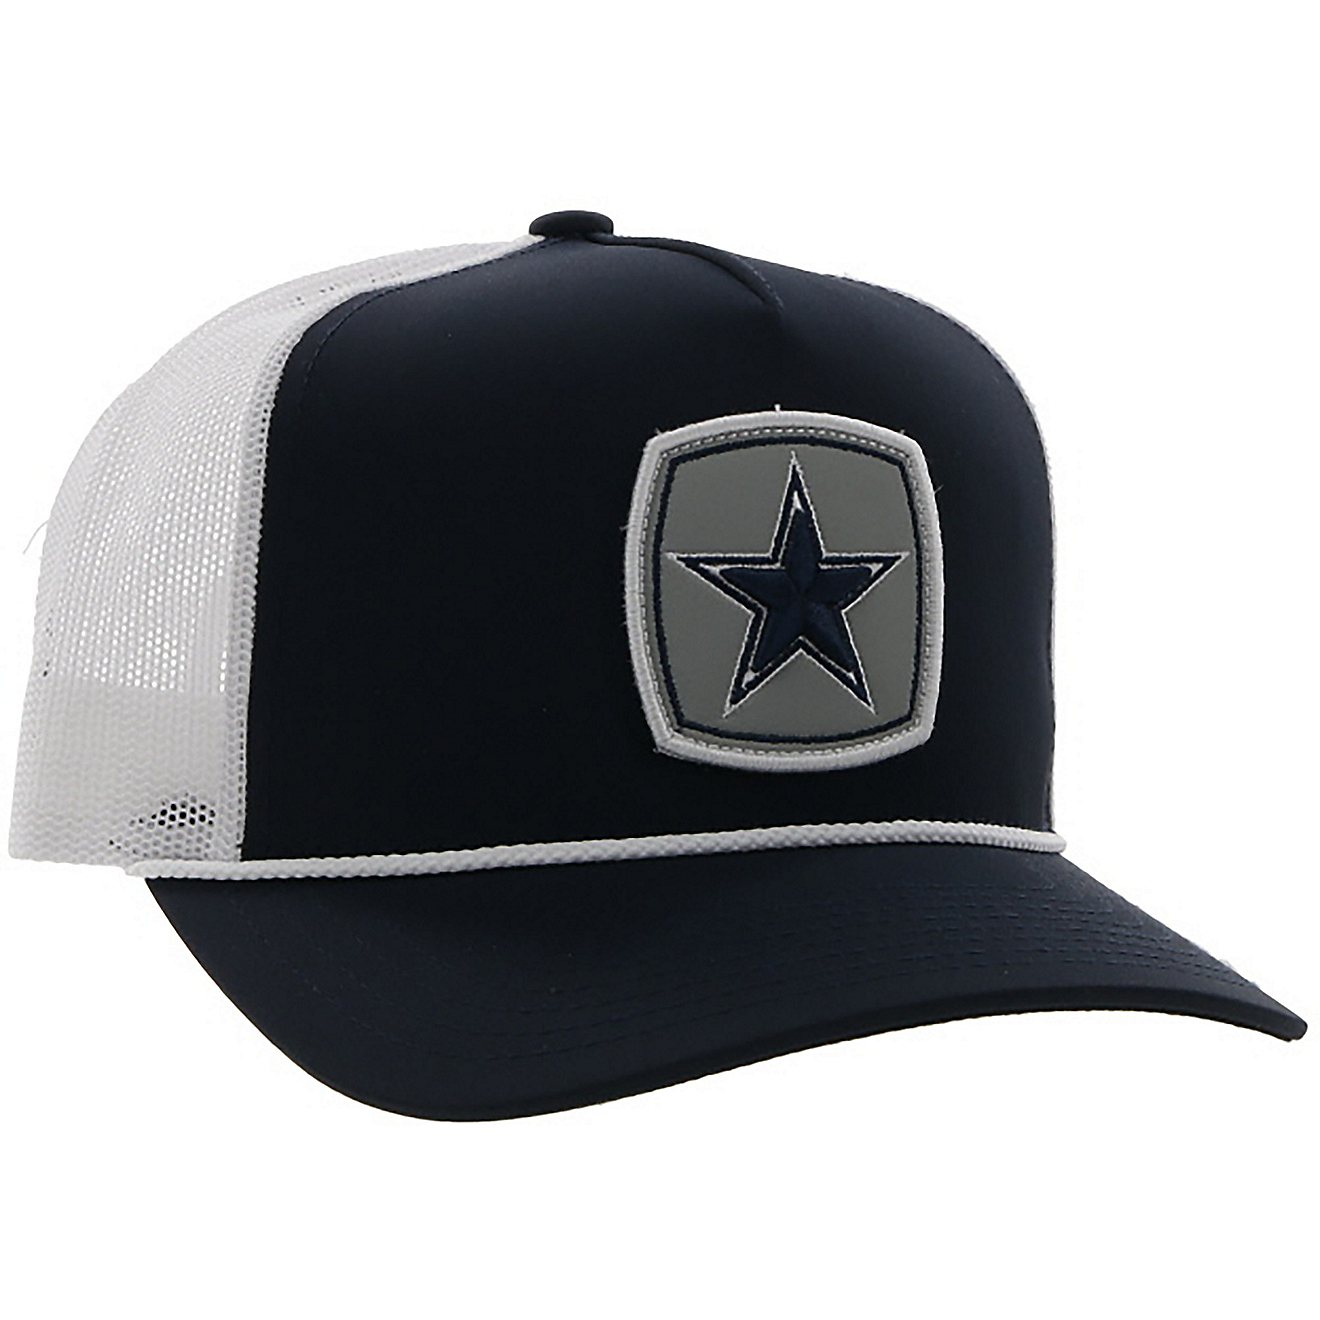 dallas cowboys hat with white rope